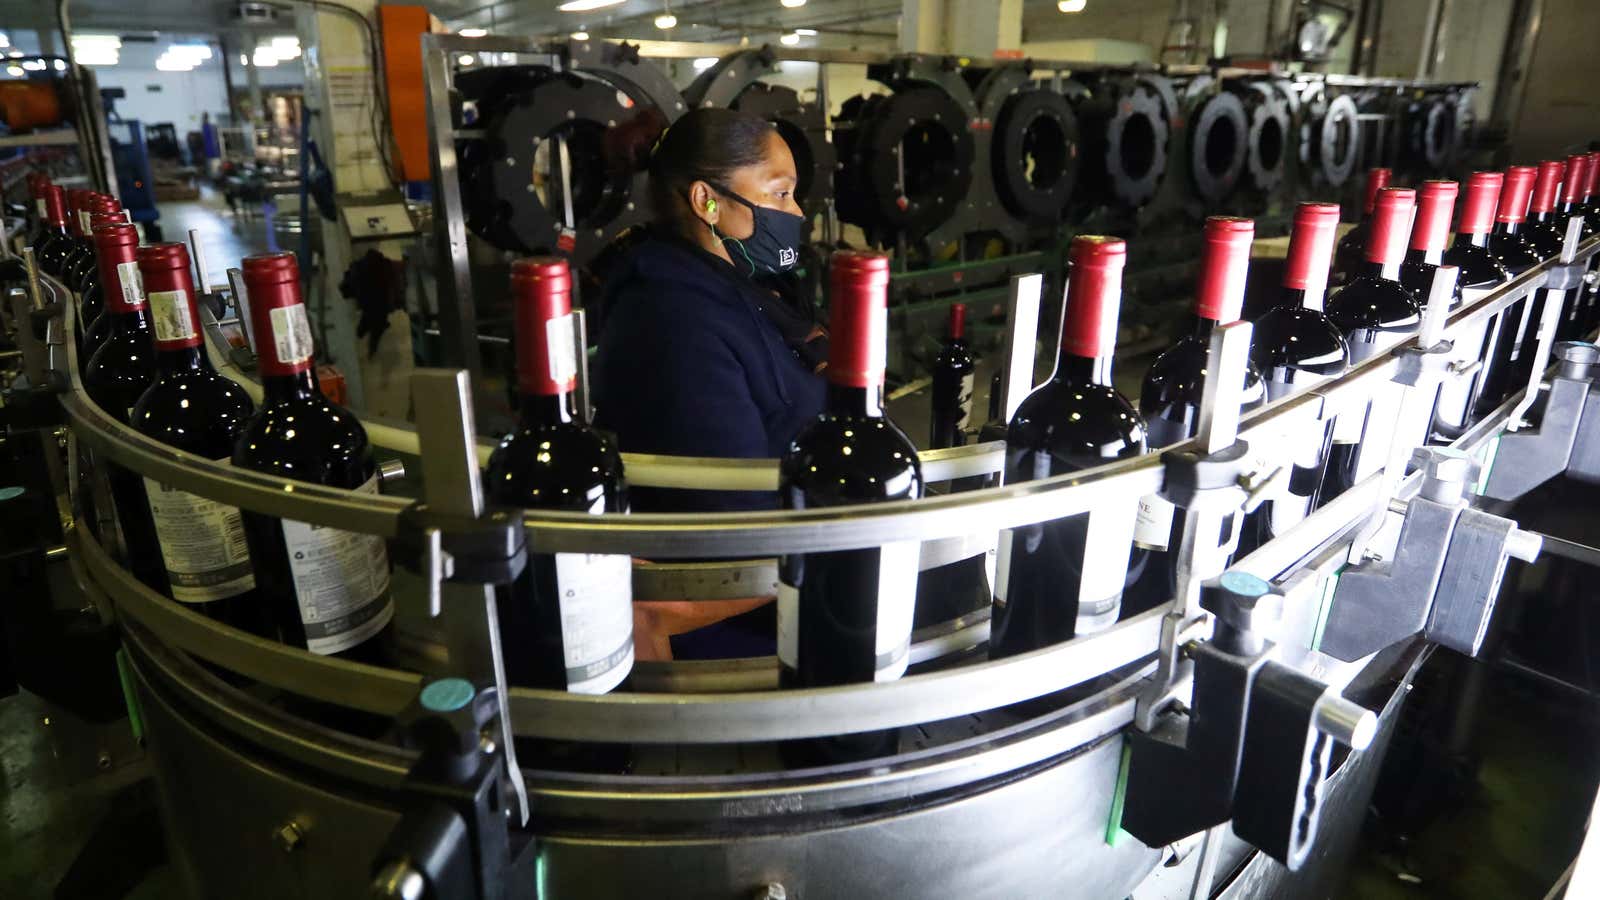 A worker checks bottles of wine coming out of a production line at Nederburg Wine Estate in Paarl, South Africa, July 8, 2020.